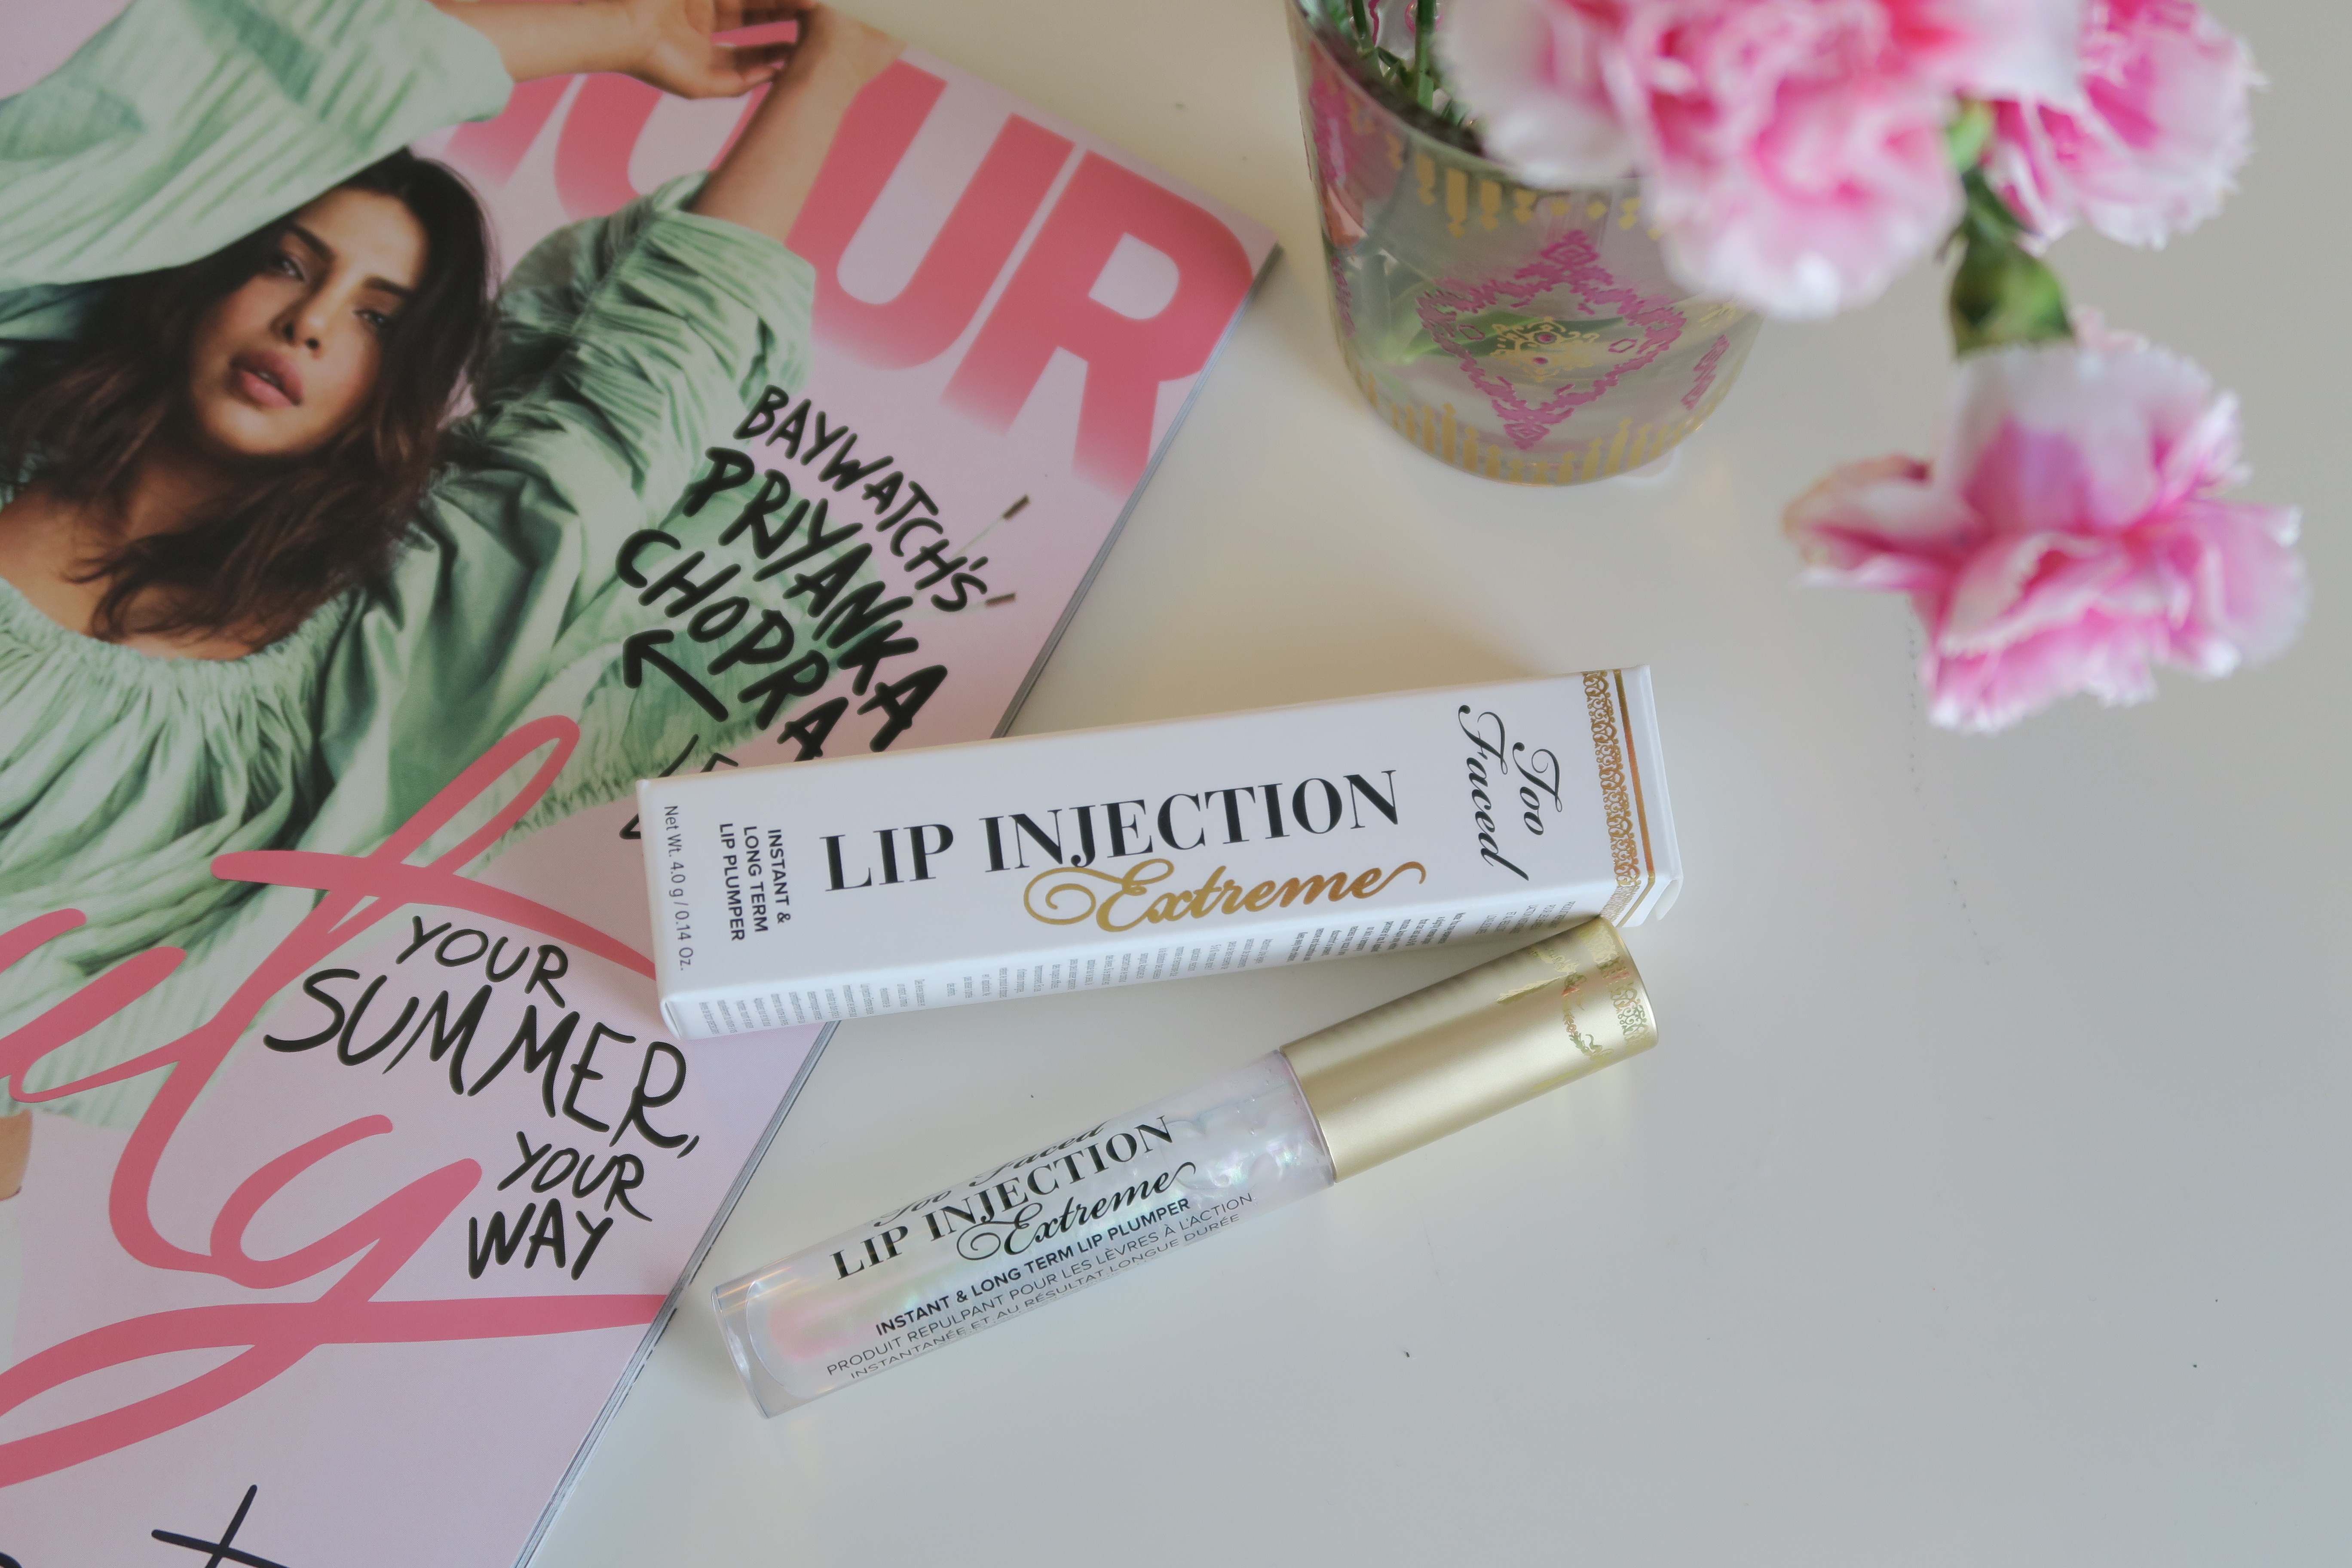 Testing Too Faced Lip Injection Extreme Gloss To Achieve Fuller Lips